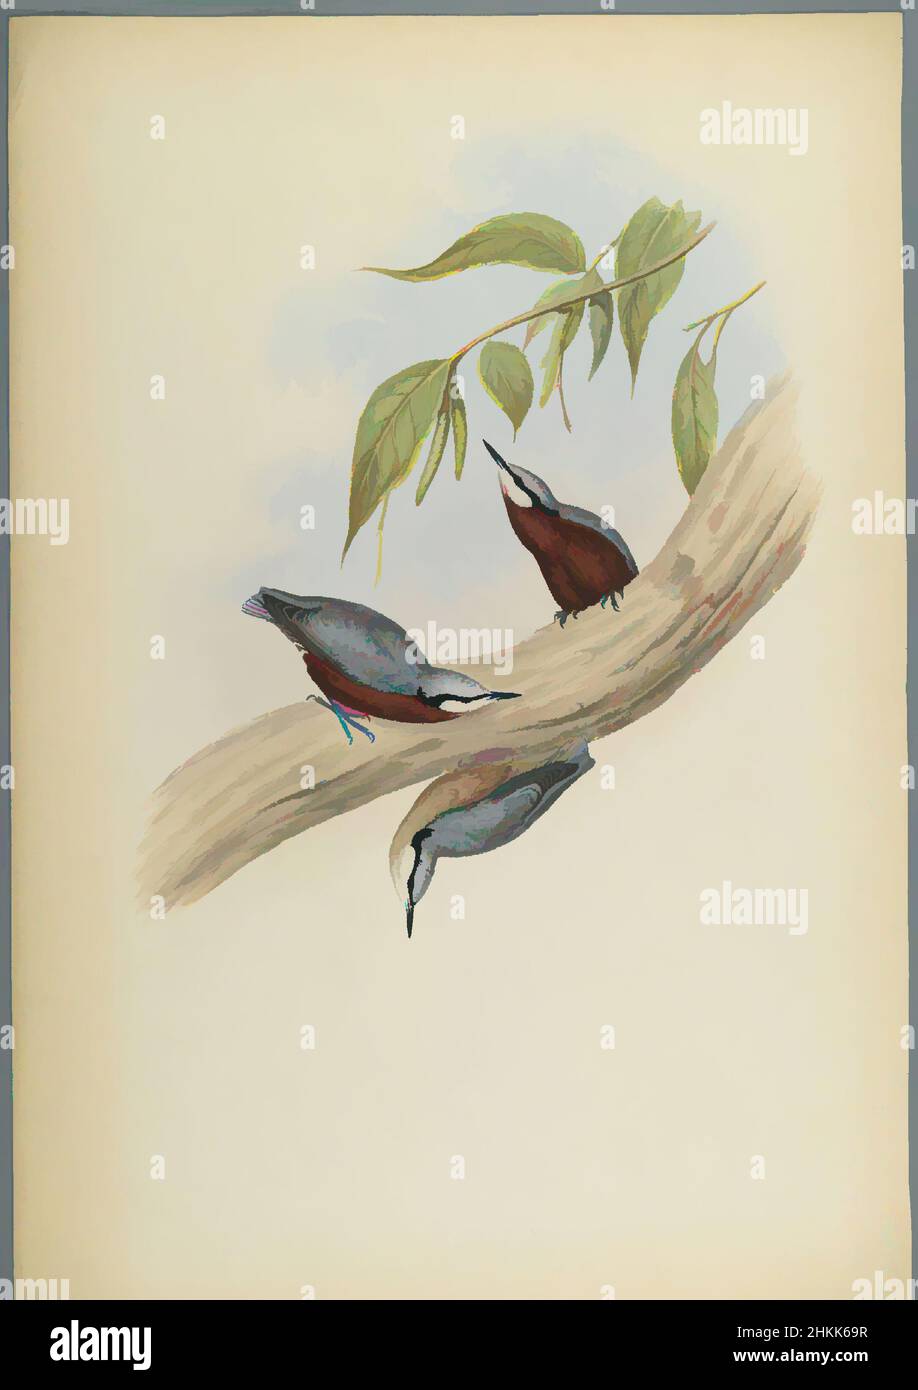 Art inspired by Stila Castaneoventris, Chestnut-Bellied Nuthatch, John Gould, British, 1804-1881, Lithograph on wove paper, Sheet: 23 3/8 x 18 7/16 in., 59.4 x 46.8 cm, Bird, Birds, Chestnut-Bellied Nuthatch, Habitat, Nature, Ornithological, Ornithology, Plants and Animals, Species, Classic works modernized by Artotop with a splash of modernity. Shapes, color and value, eye-catching visual impact on art. Emotions through freedom of artworks in a contemporary way. A timeless message pursuing a wildly creative new direction. Artists turning to the digital medium and creating the Artotop NFT Stock Photo